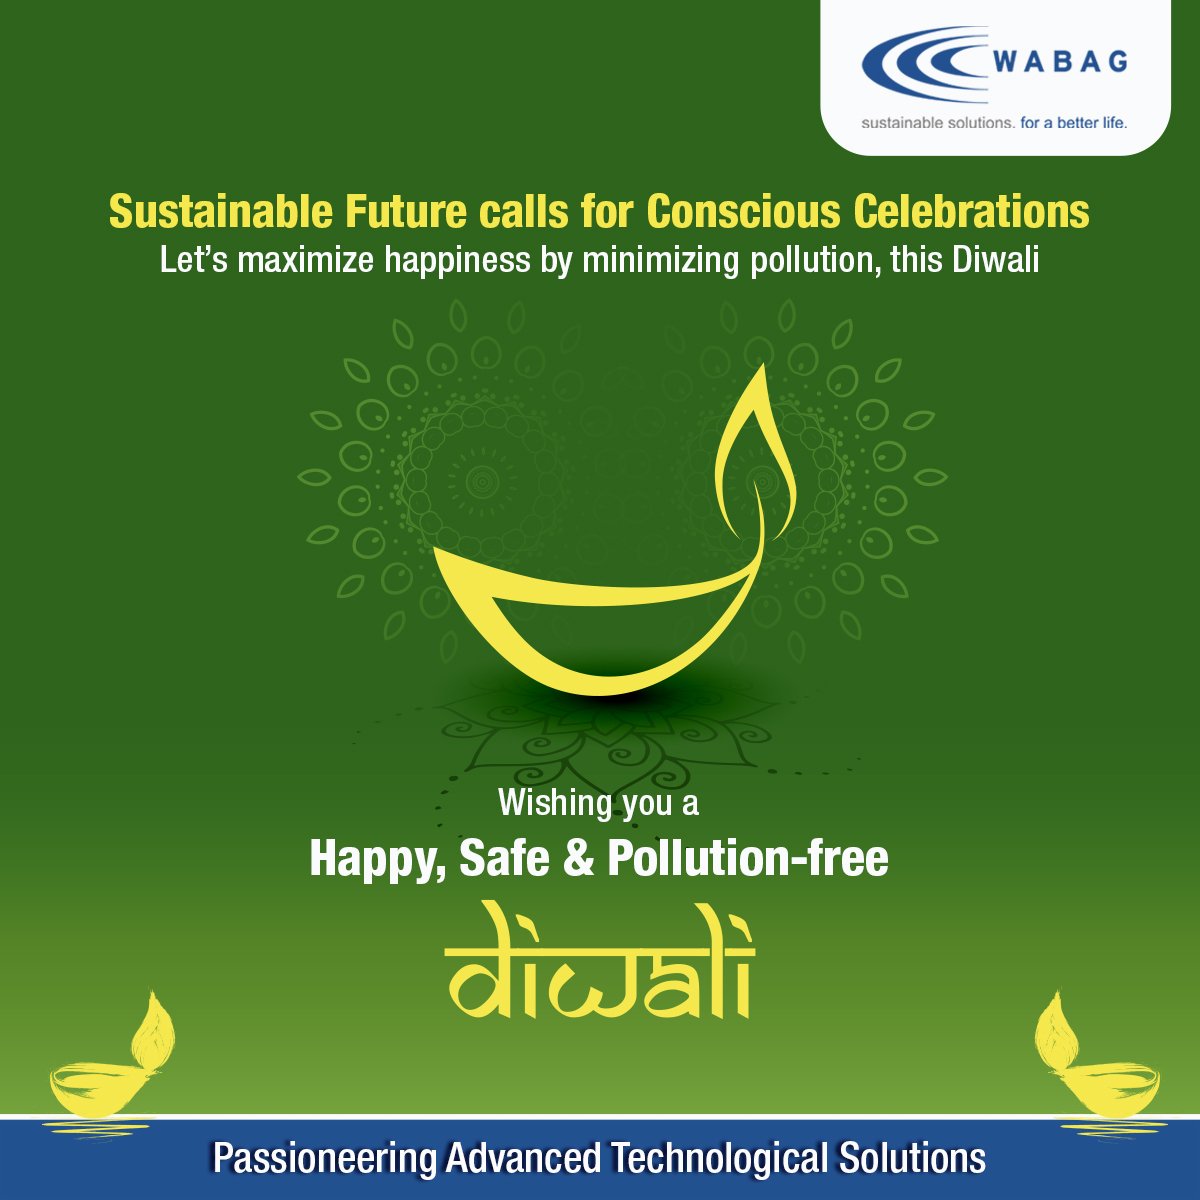 May the festival of lights add more Brightness, Sweetness & Happiness to your life. WABAG wishes you all a Happy, Safe & Pollution-free Diwali.

#Diwali #Celebration #Happiness #Prosperity  #SustainableFuture #MindfulCelebration #GreenDiwali #IndianFestival #WABAG #Passioneering